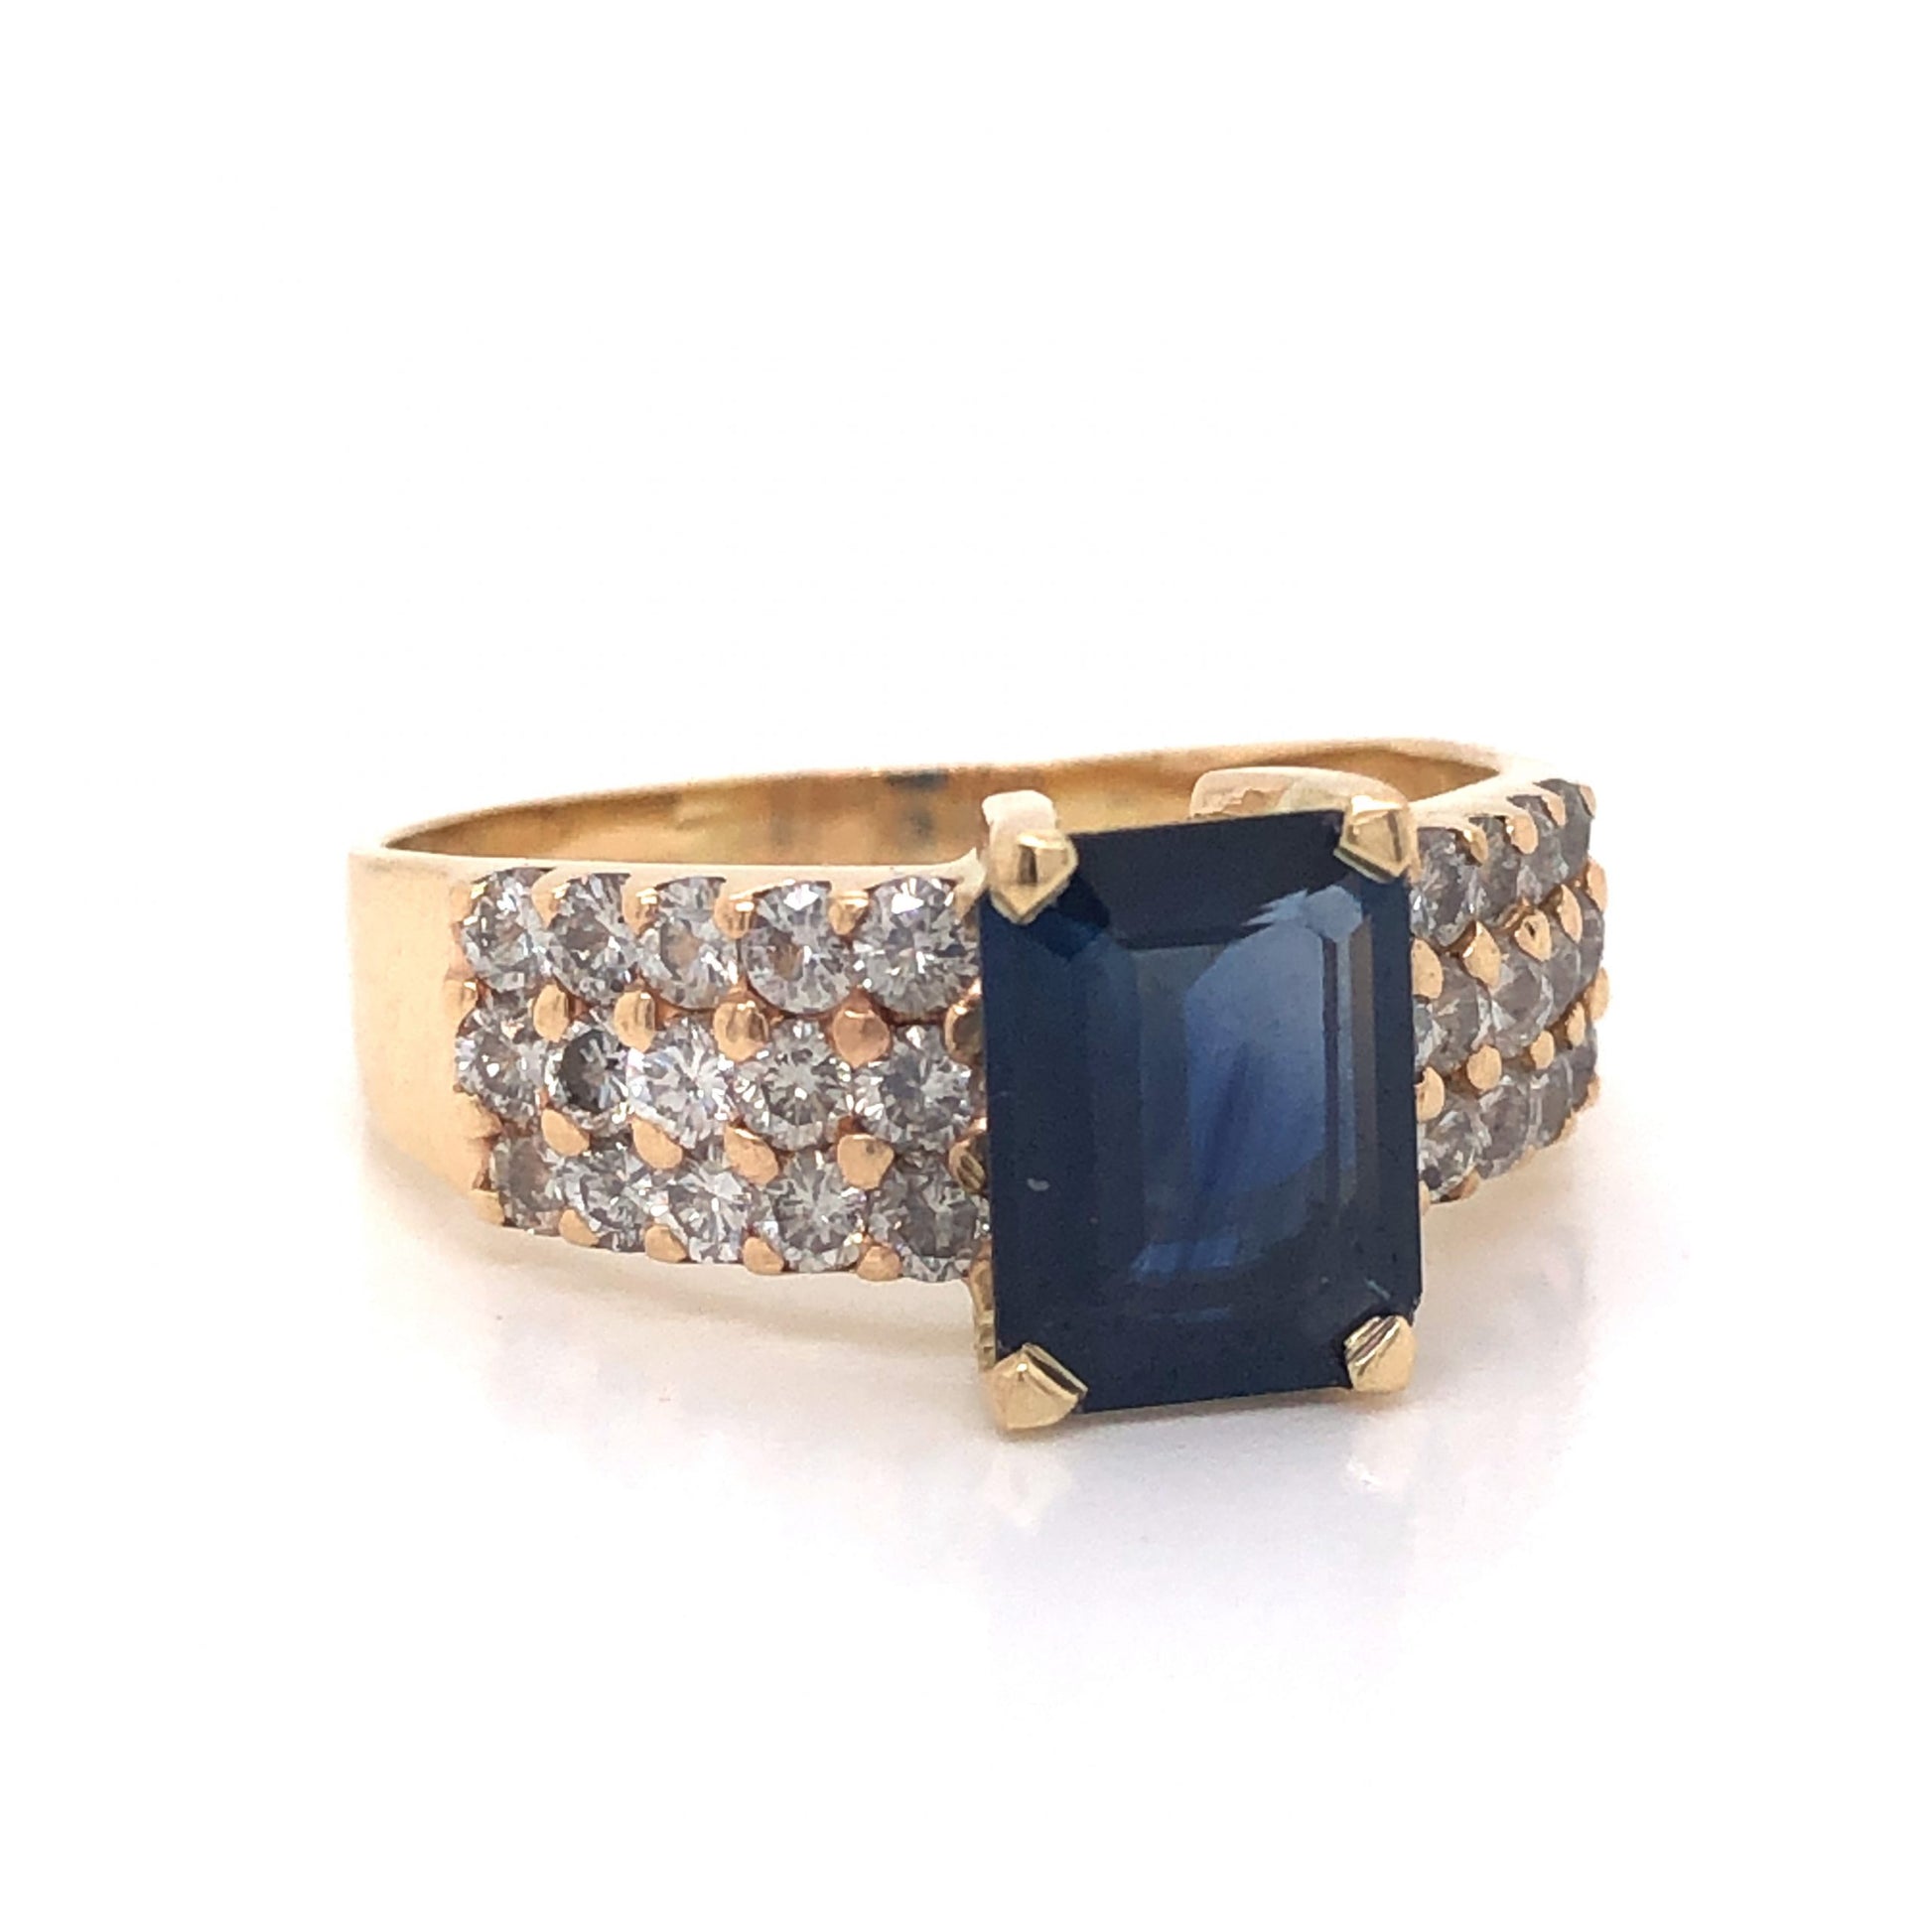 1.79 Emerald Cut Sapphire Engagement Ring in 14k Yellow GoldComposition: 14 Karat Yellow Gold Ring Size: 7 Total Diamond Weight: .90ct Total Gram Weight: 4.4 g Inscription: 14k ZM
      